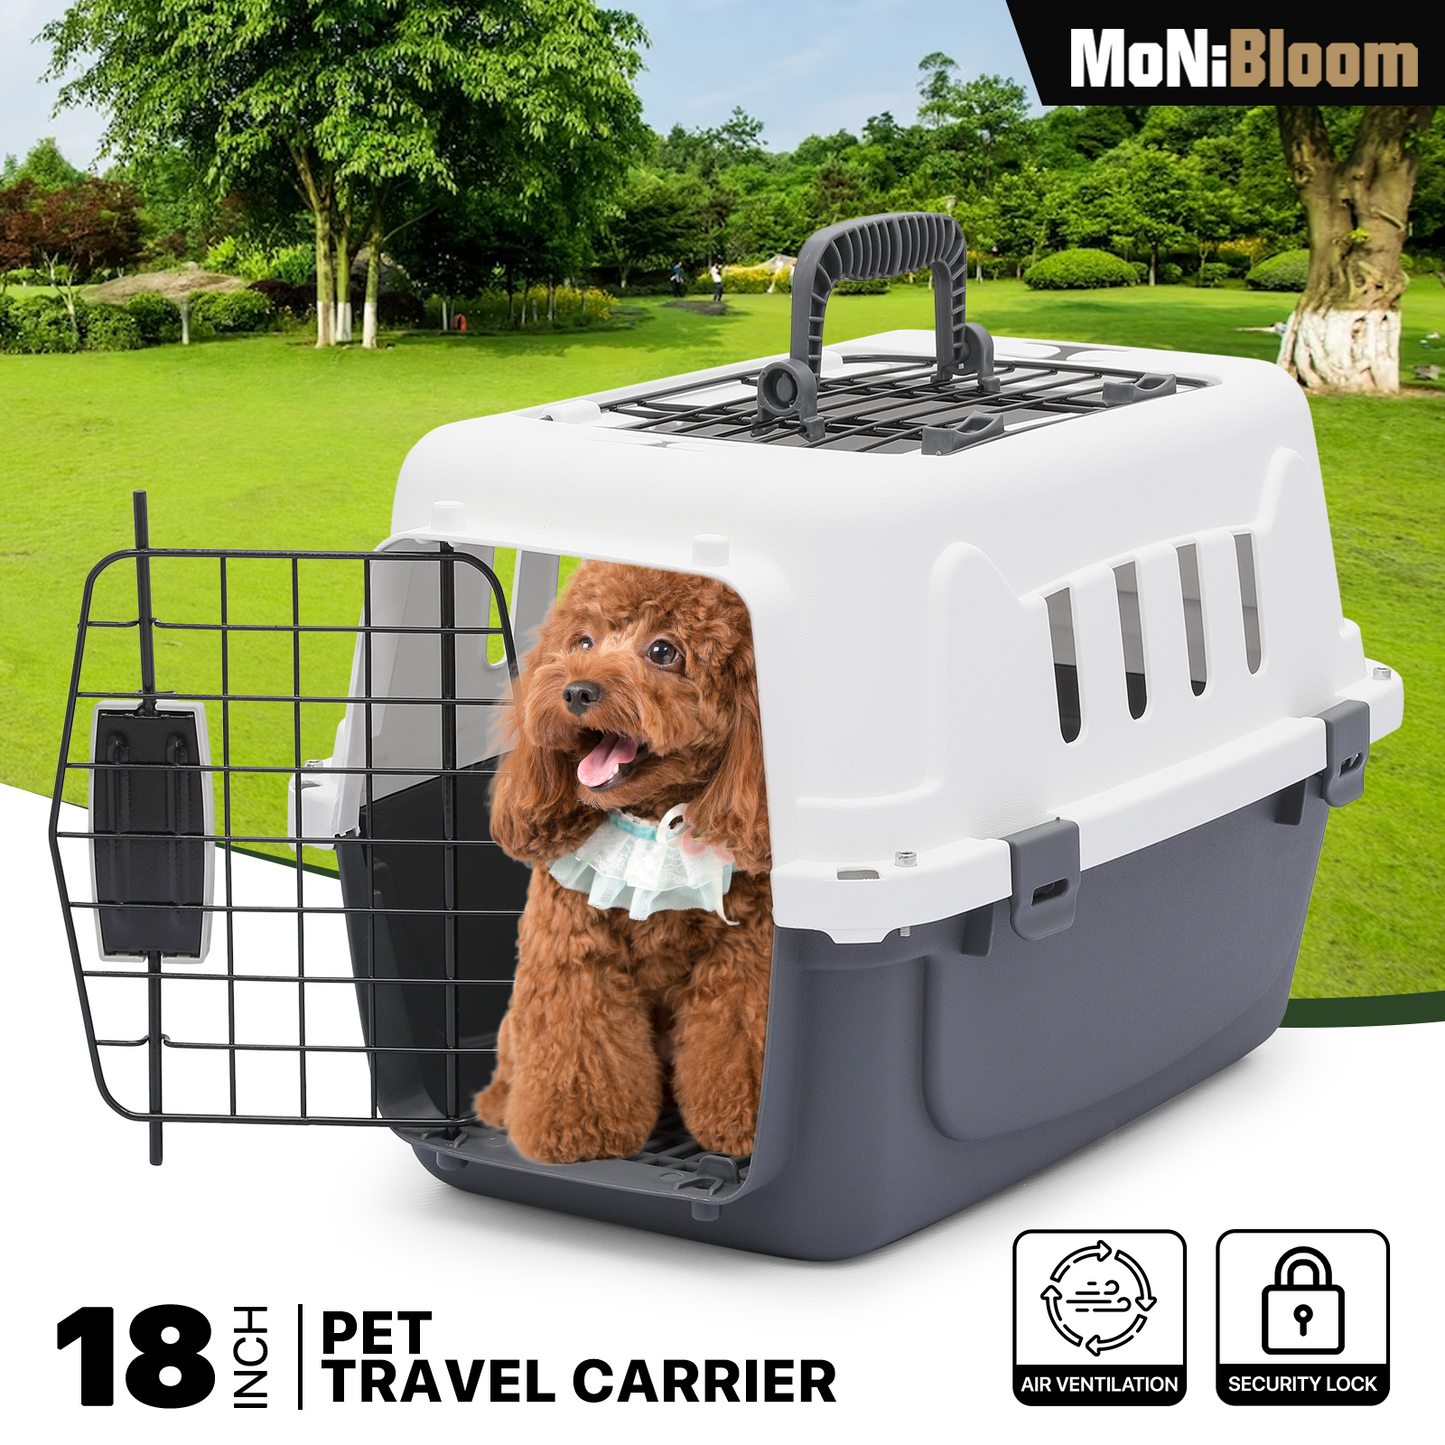 18 Inch Pet Plastic Travel Carrier - Up to 10 lbs